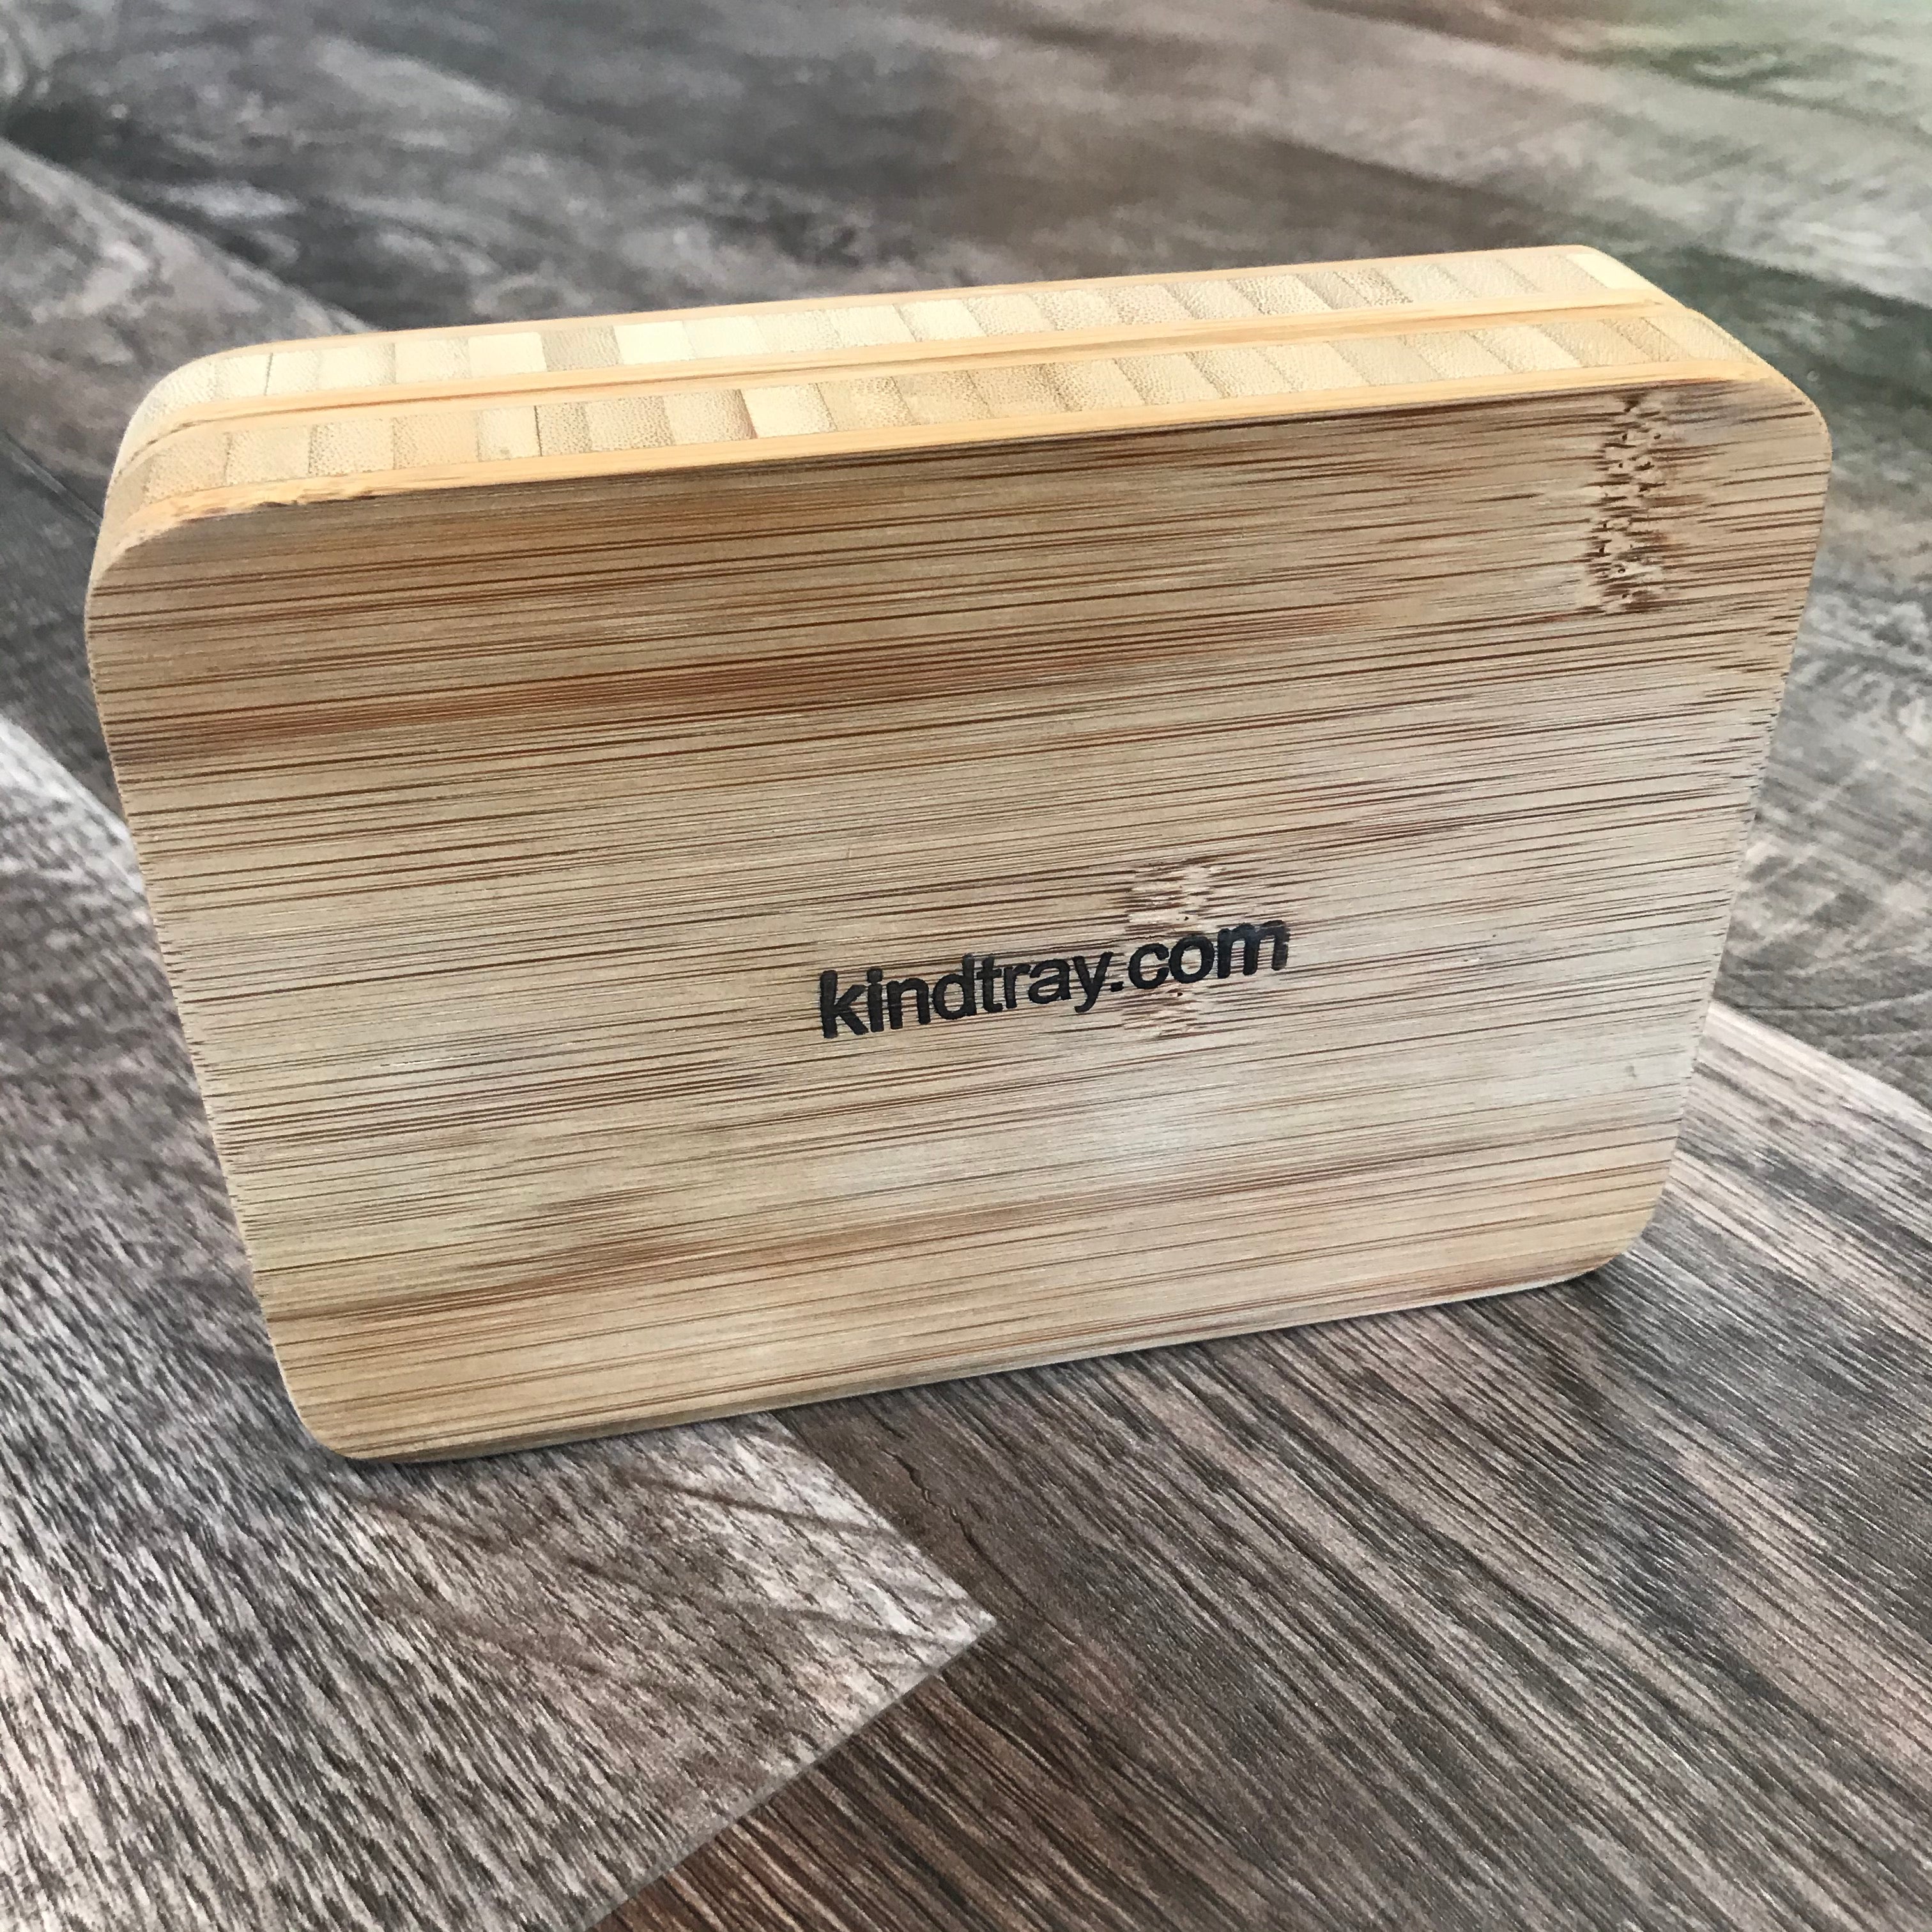 Kind Small Wooden Tray